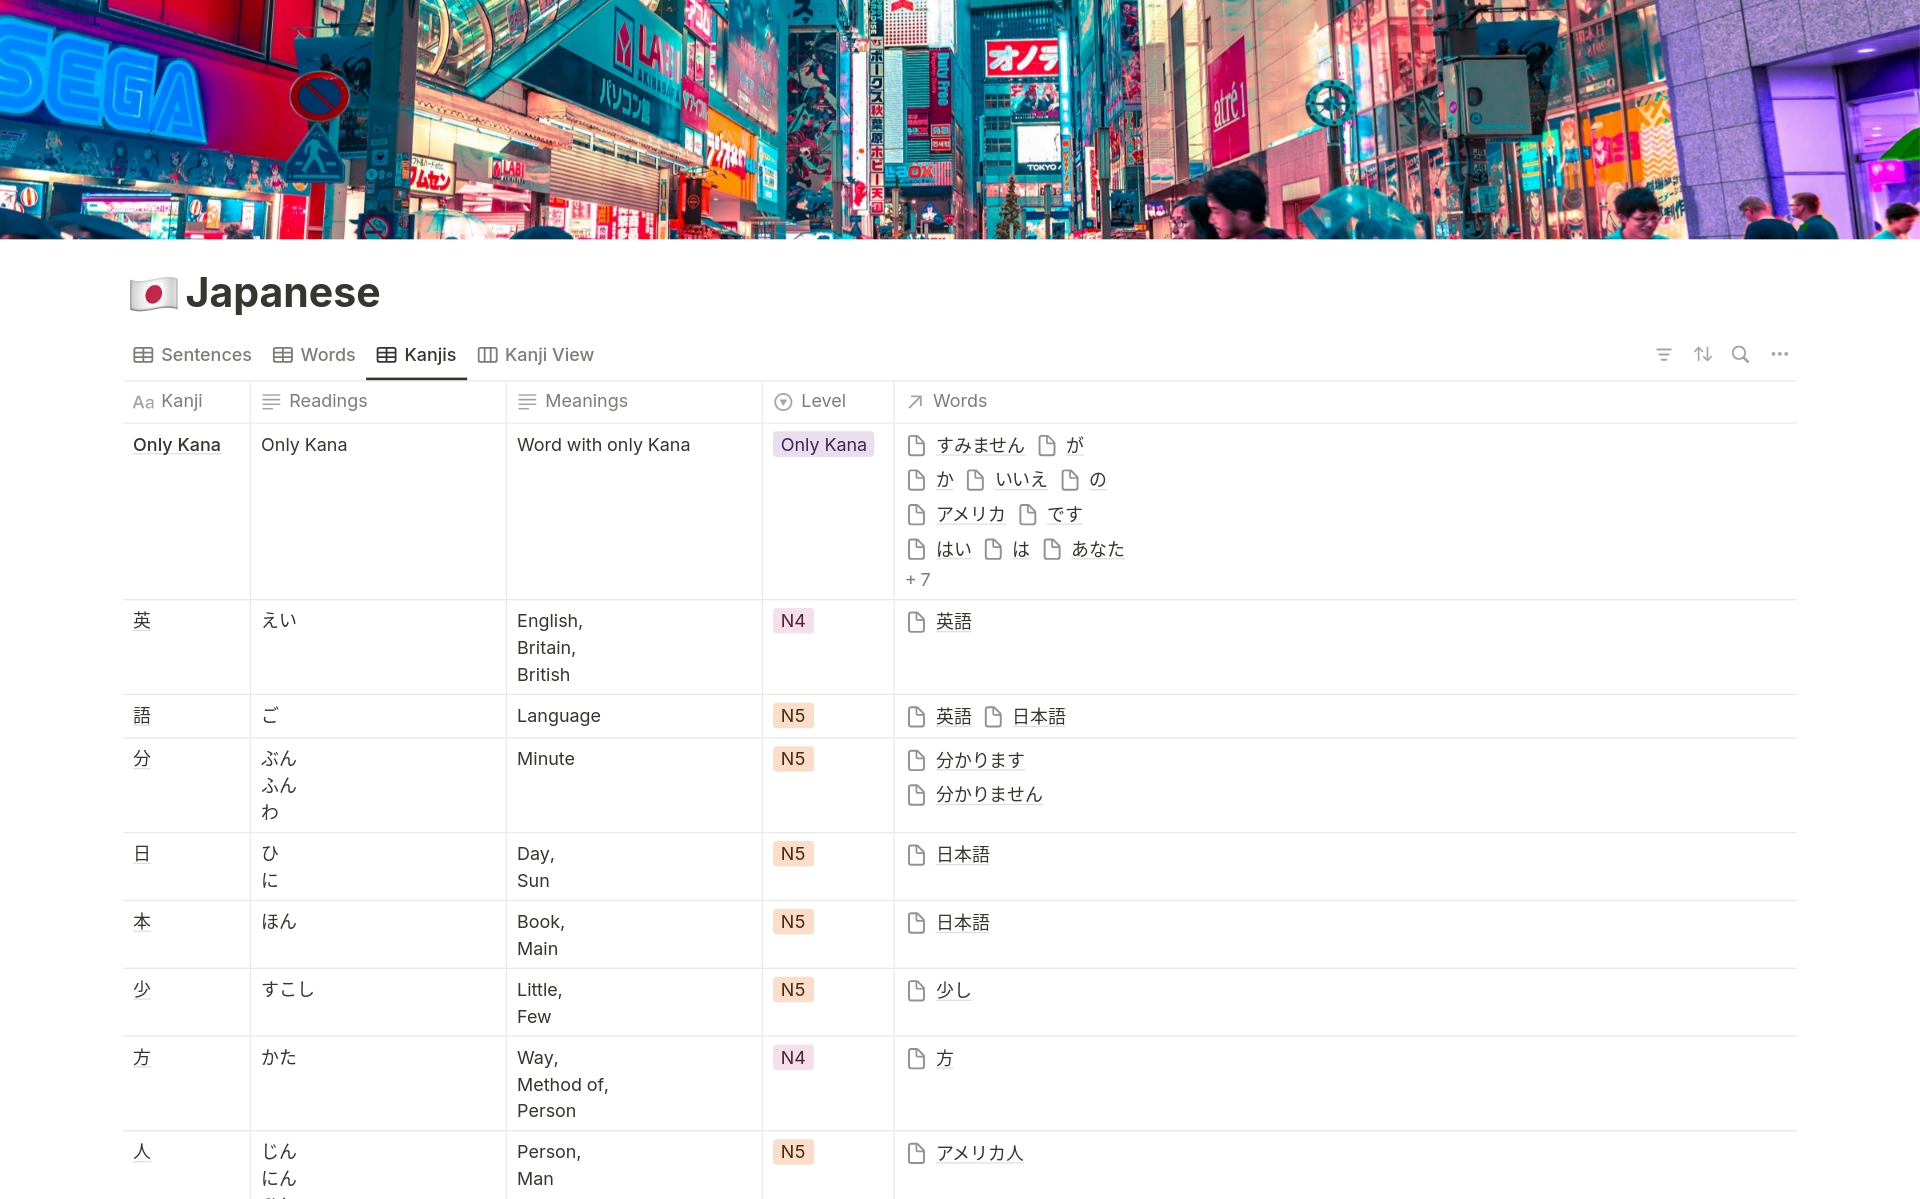 Explore the world of the Japanese language in an organized and efficient way with our exclusive Notion template for Japanese language learning! This vocabulary system is designed for those who want to master Japanese in a systematic and interactive manner.